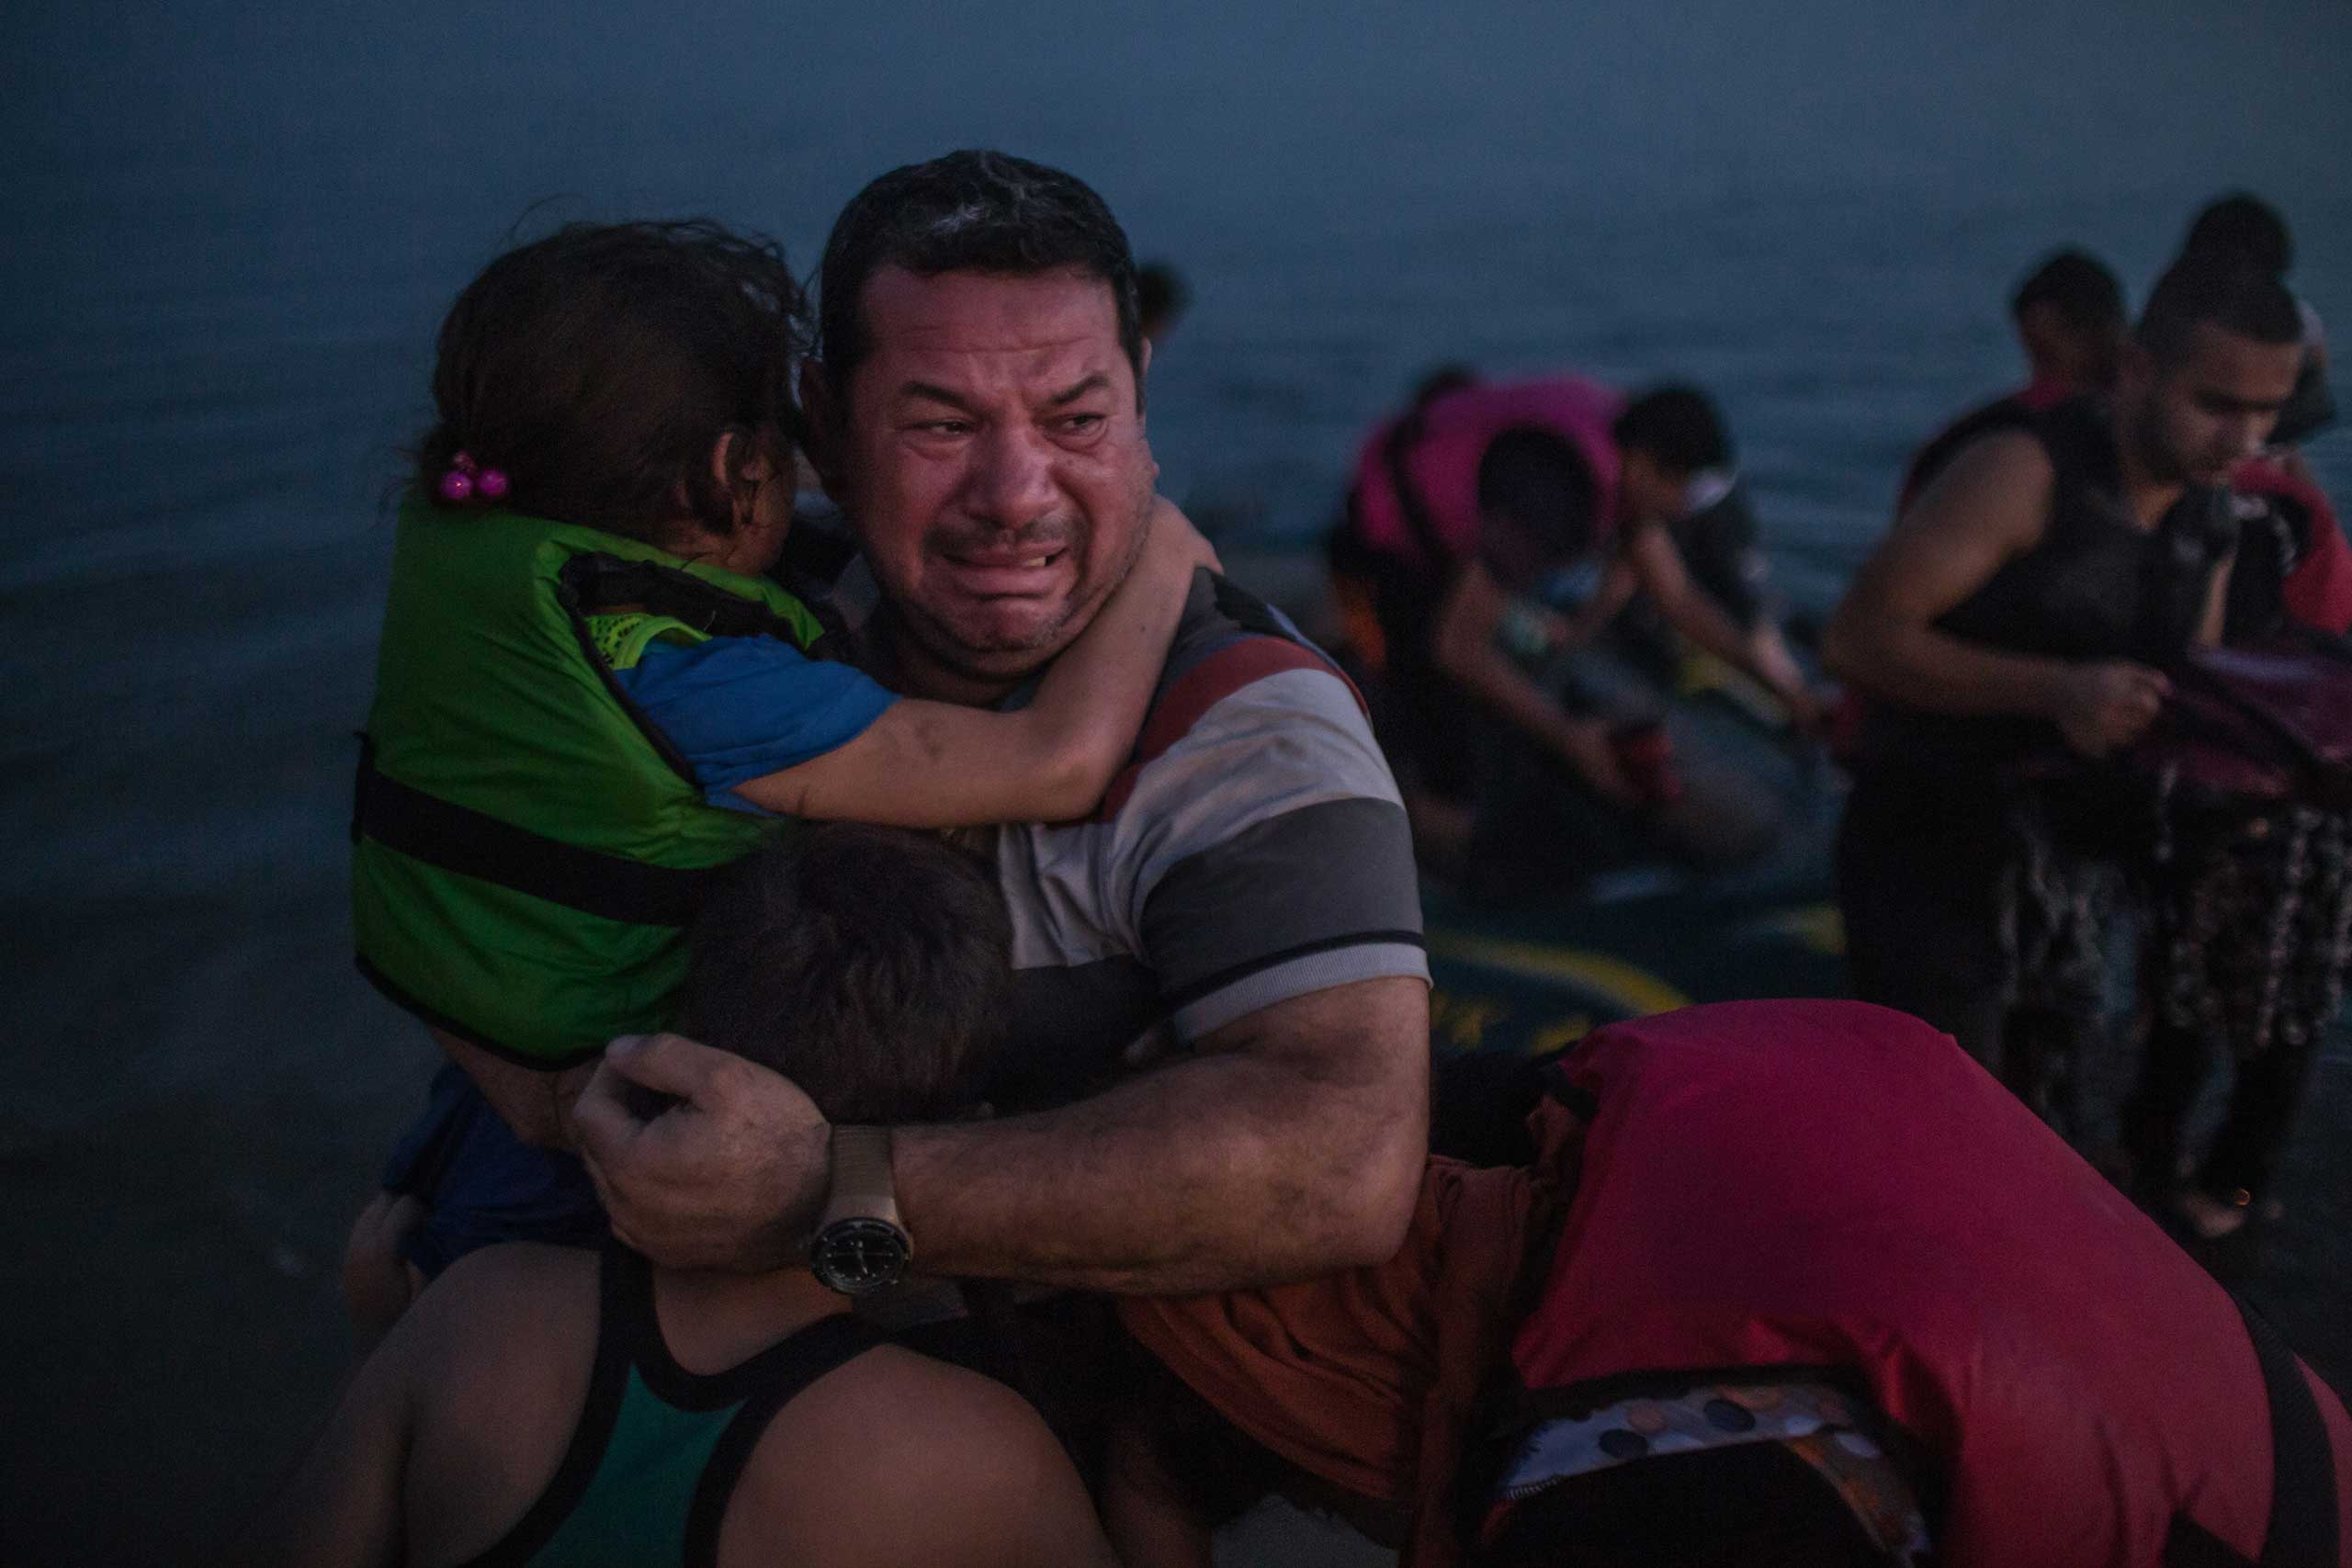 Laith Majid, an Iraqi, broke out in tears of joy, holding his son and daughter after they arrived safely in Kos, Greece, on a flimsy rubber boat. Aug. 15, 2015